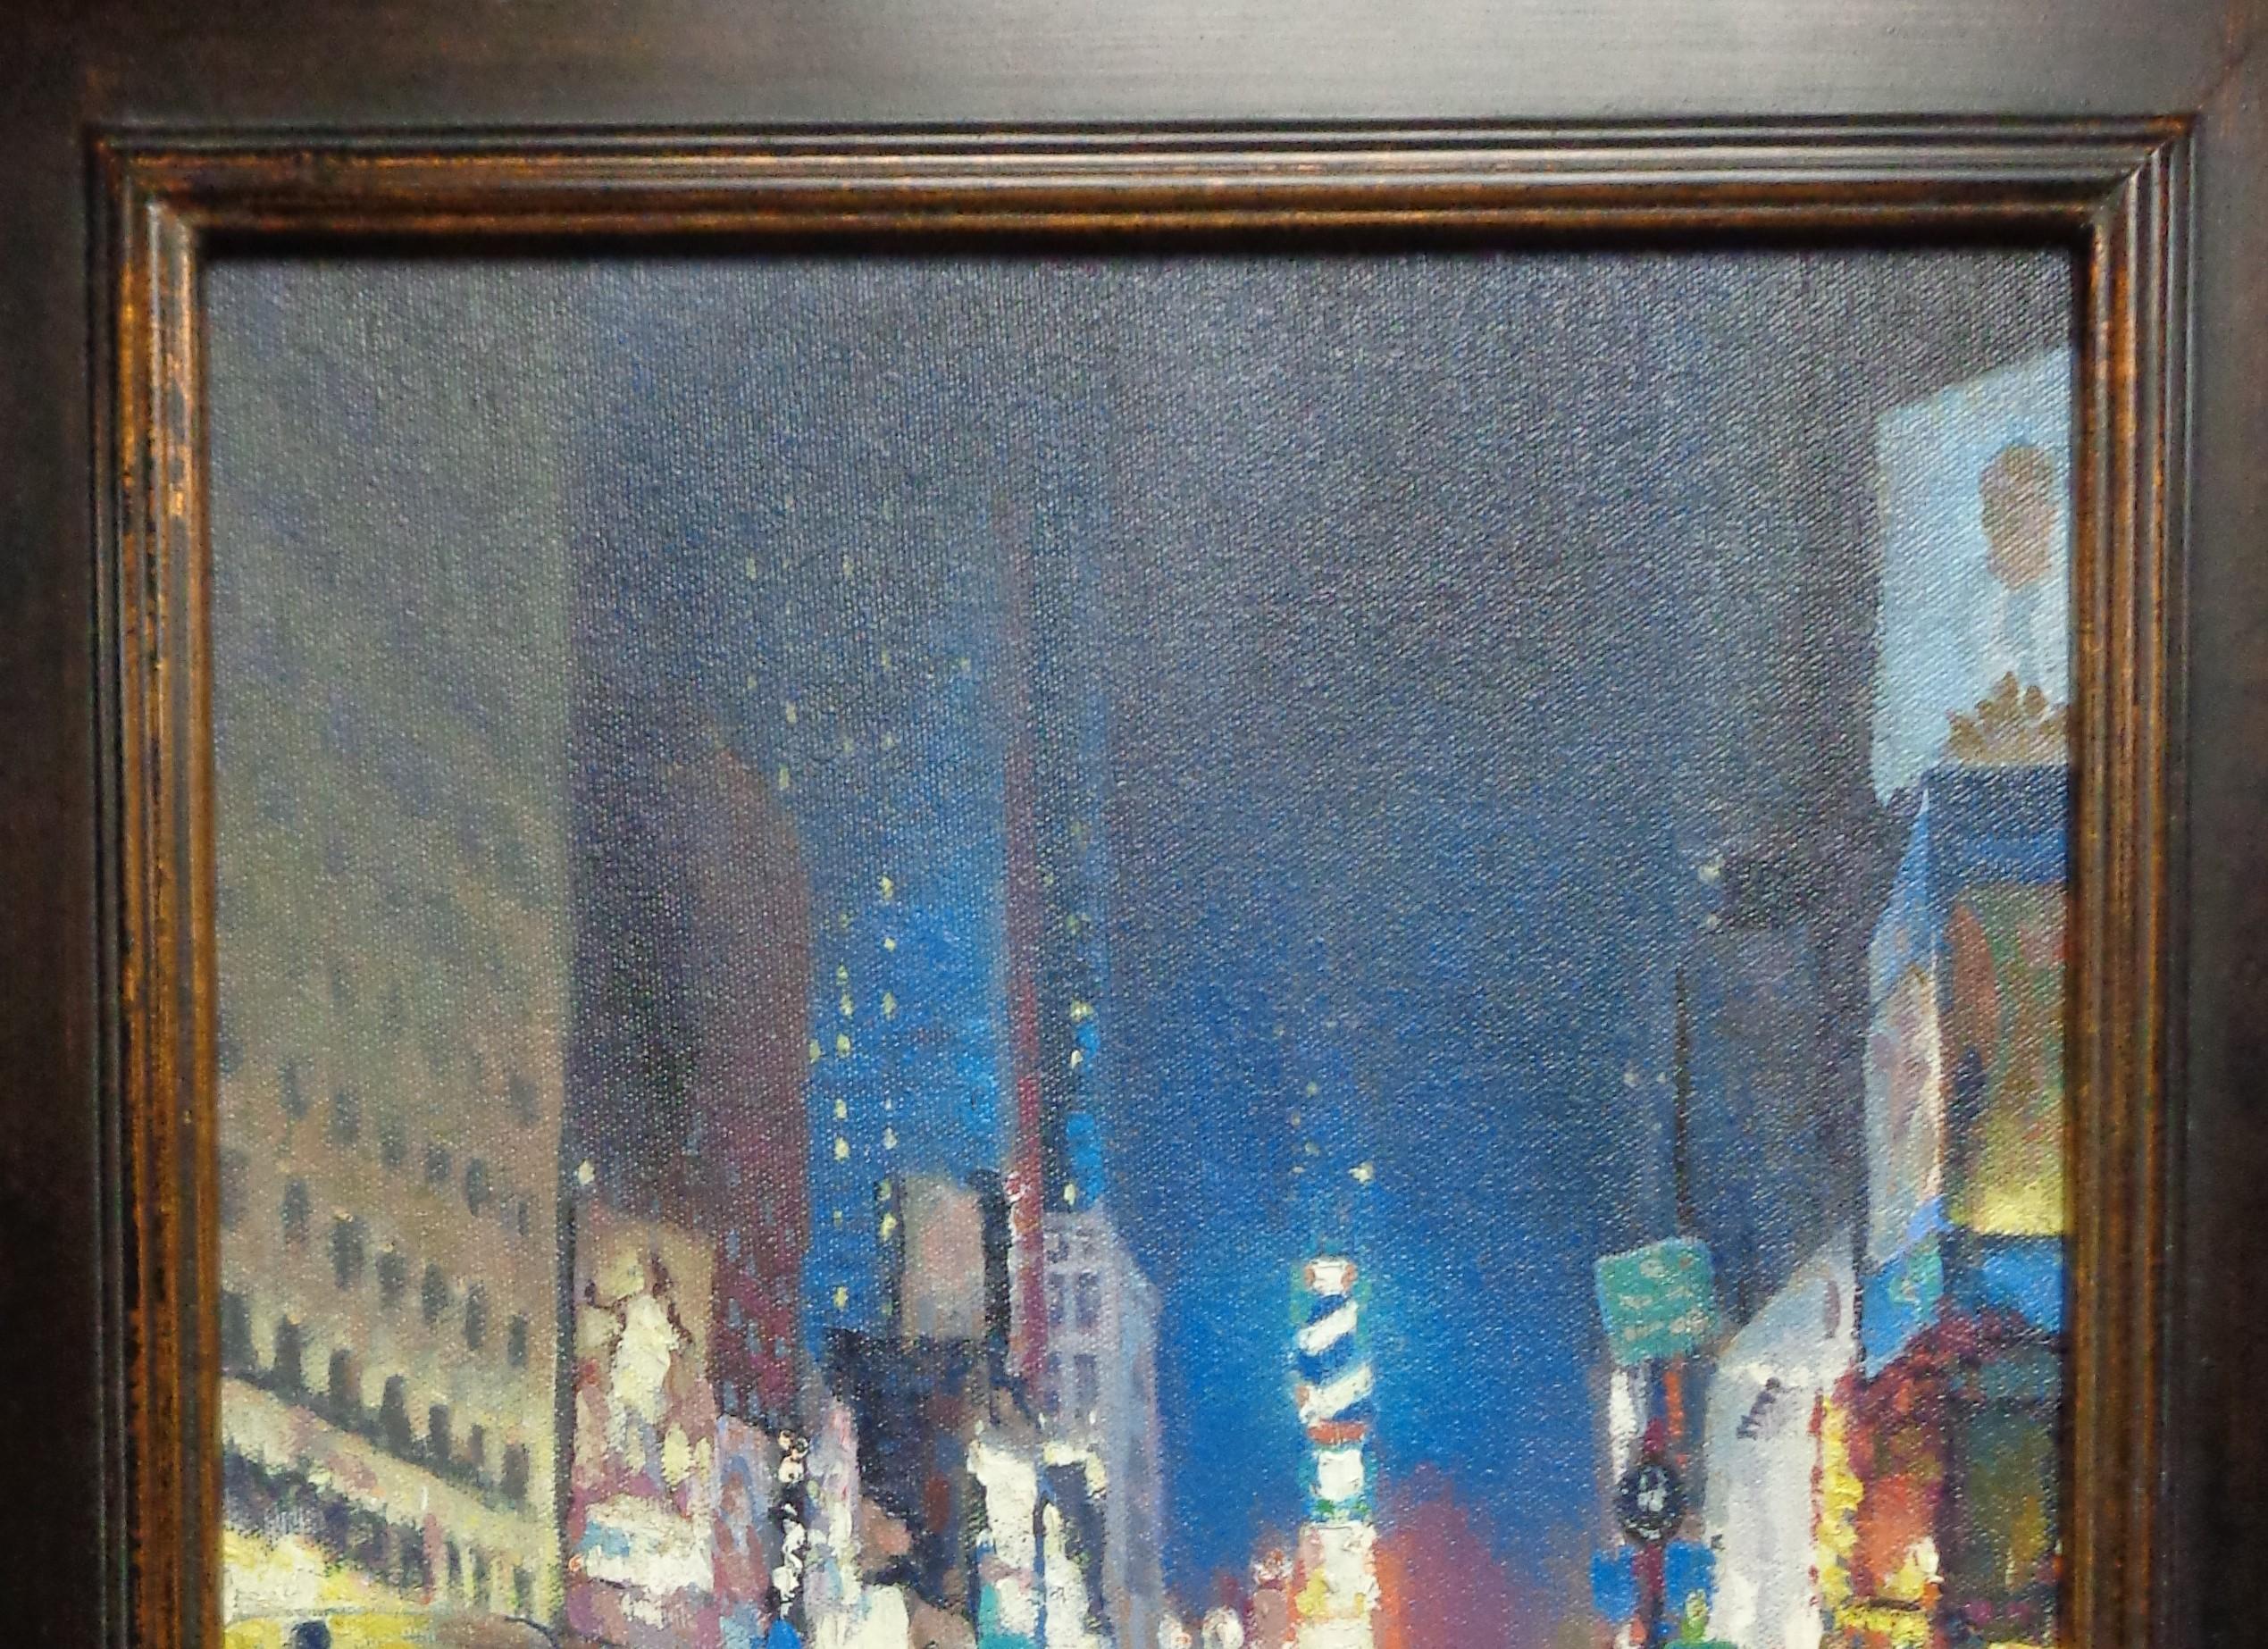  New York City Nocturne Oil Painting Michael Budden Times Square For Sale 1